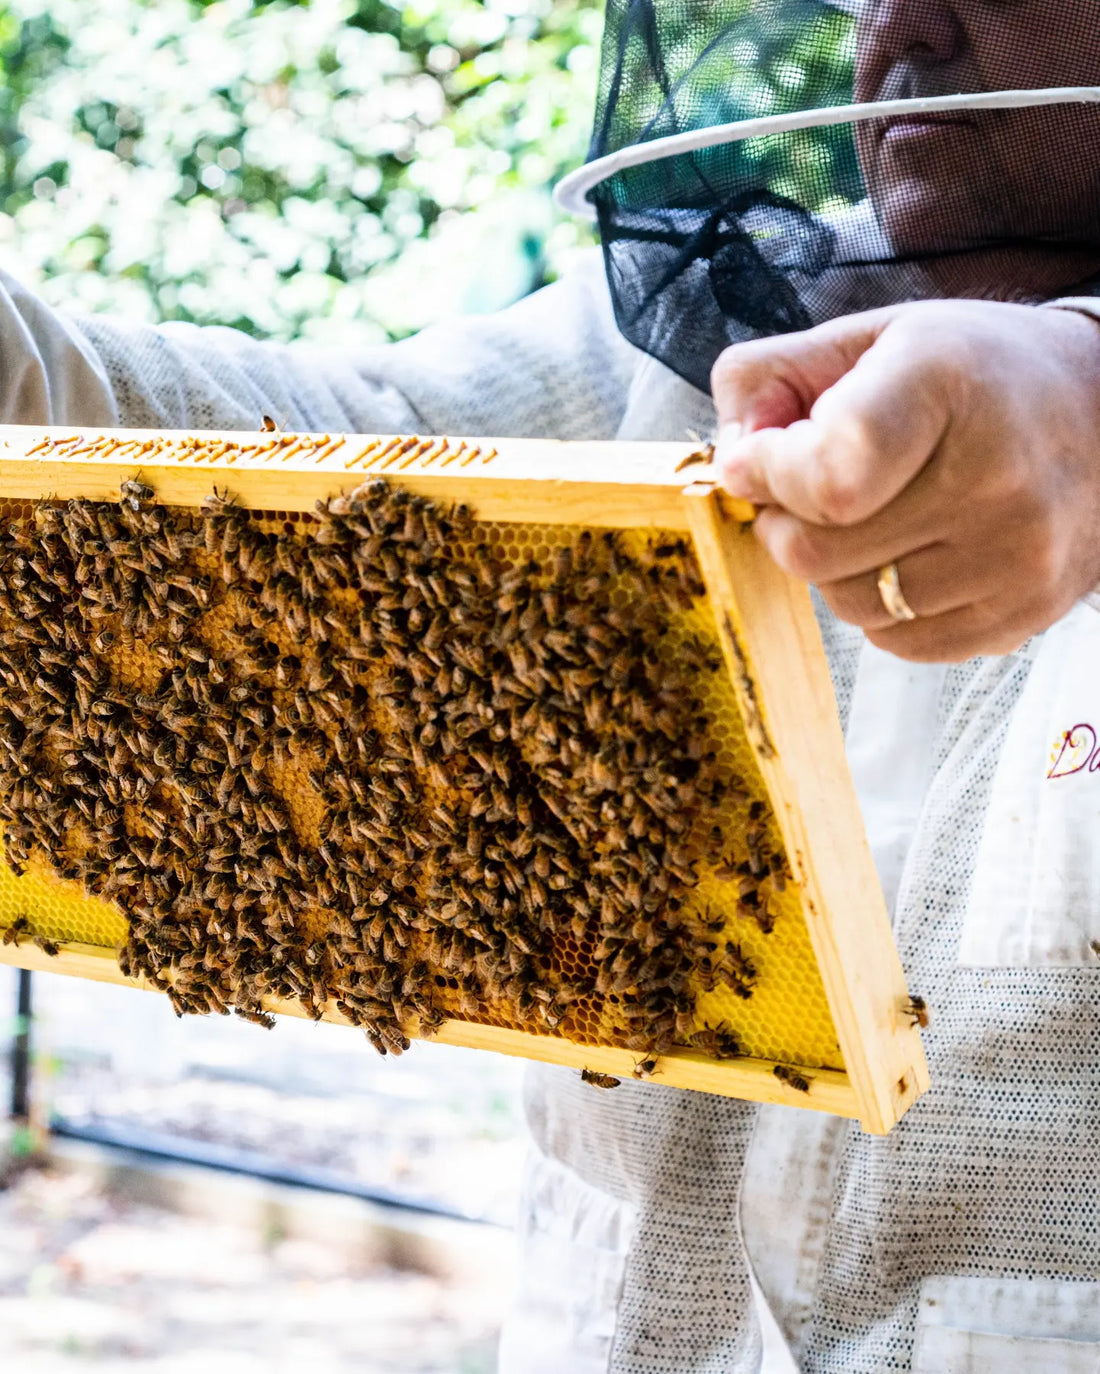 Do you wanna start beekeeping in NYC, Why?